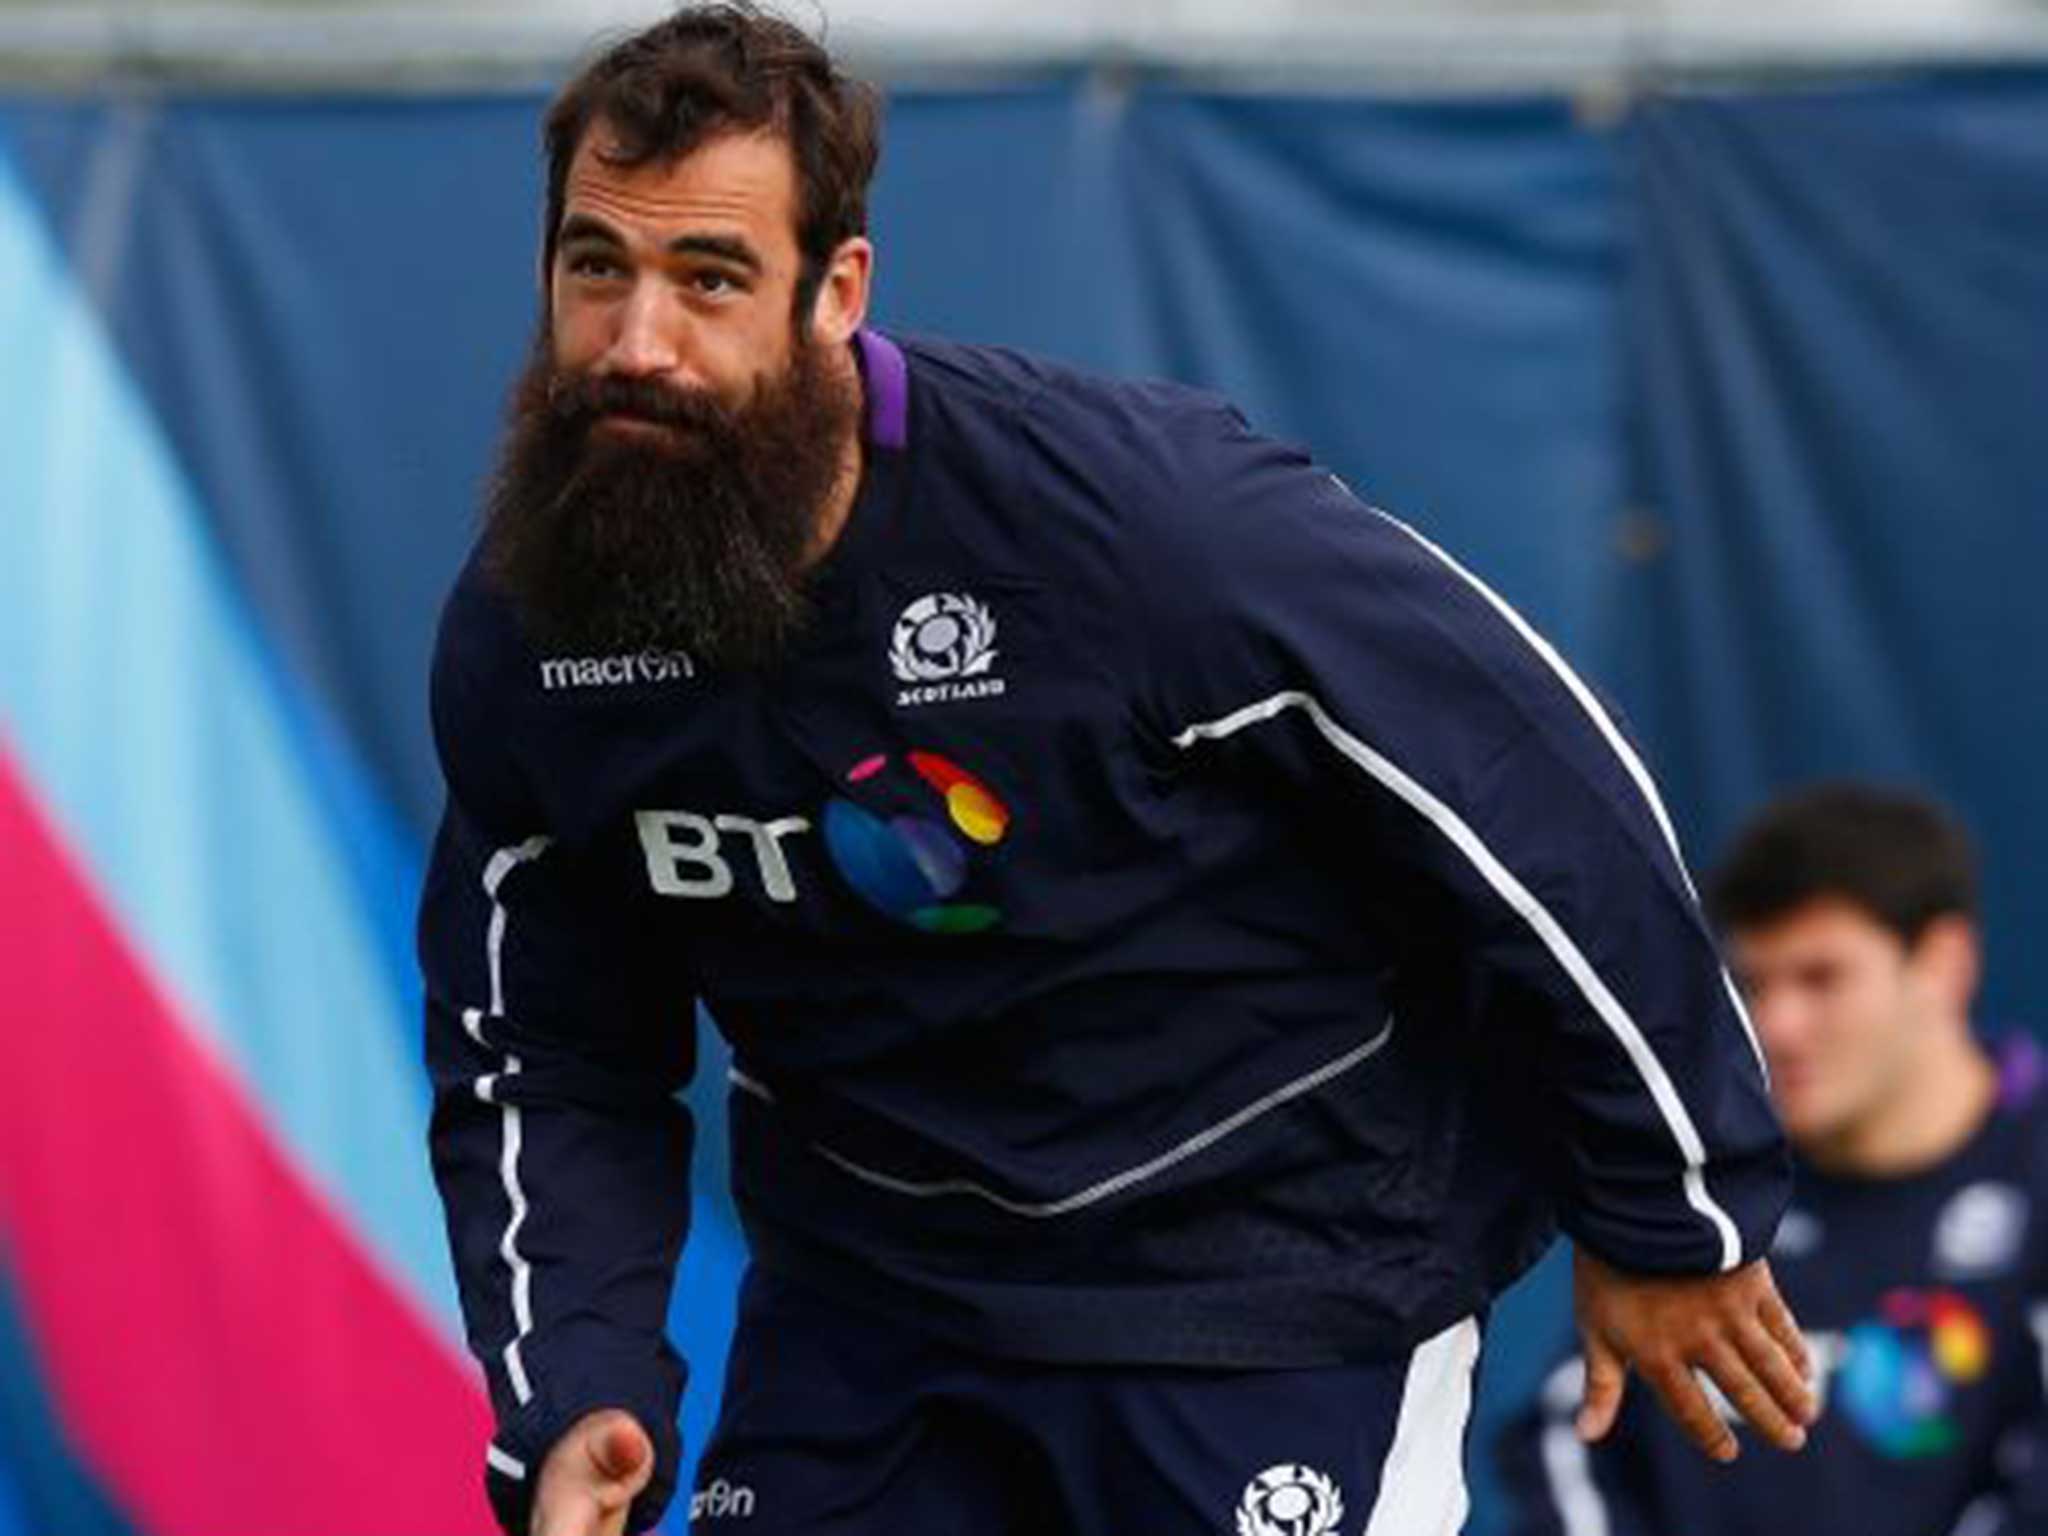 Scotland’s Josh Strauss gets the nod at No 8 for his bulk and power